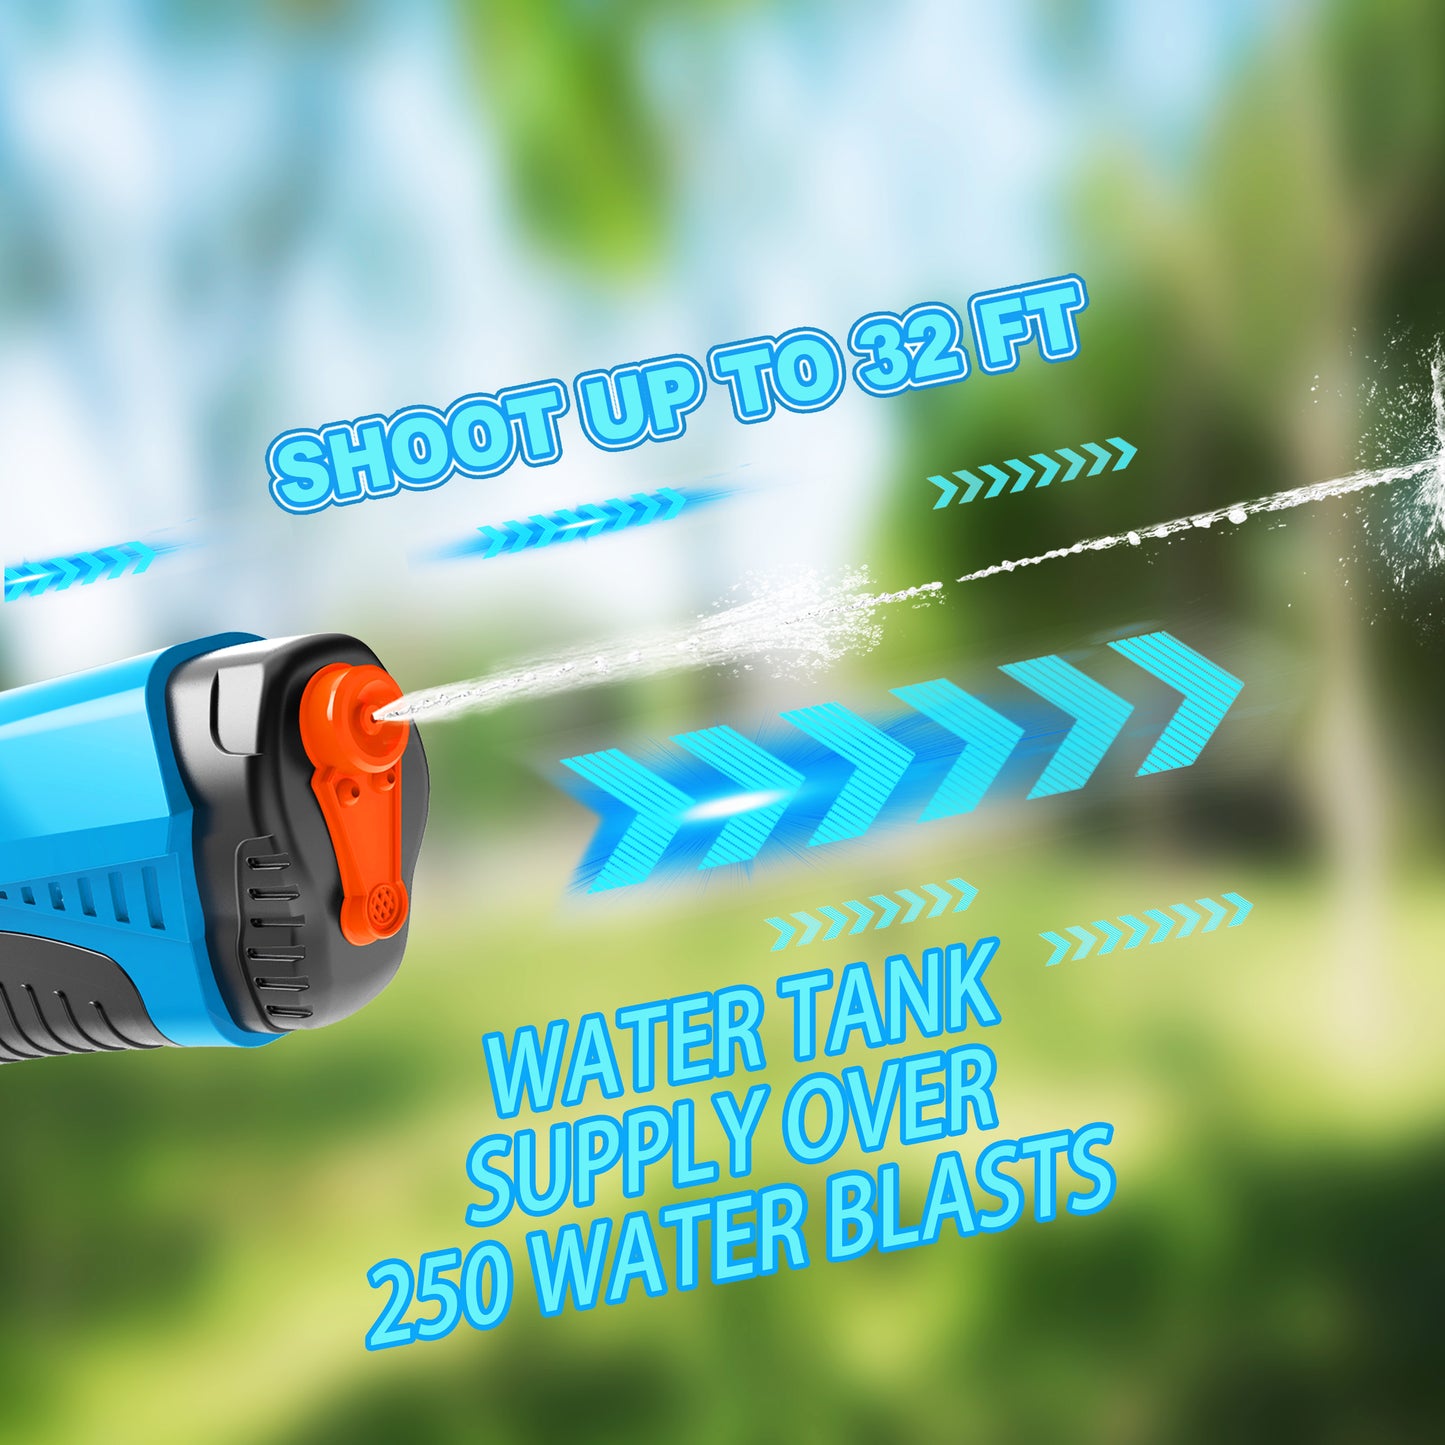 Funwee Automatic Electric Water Guns